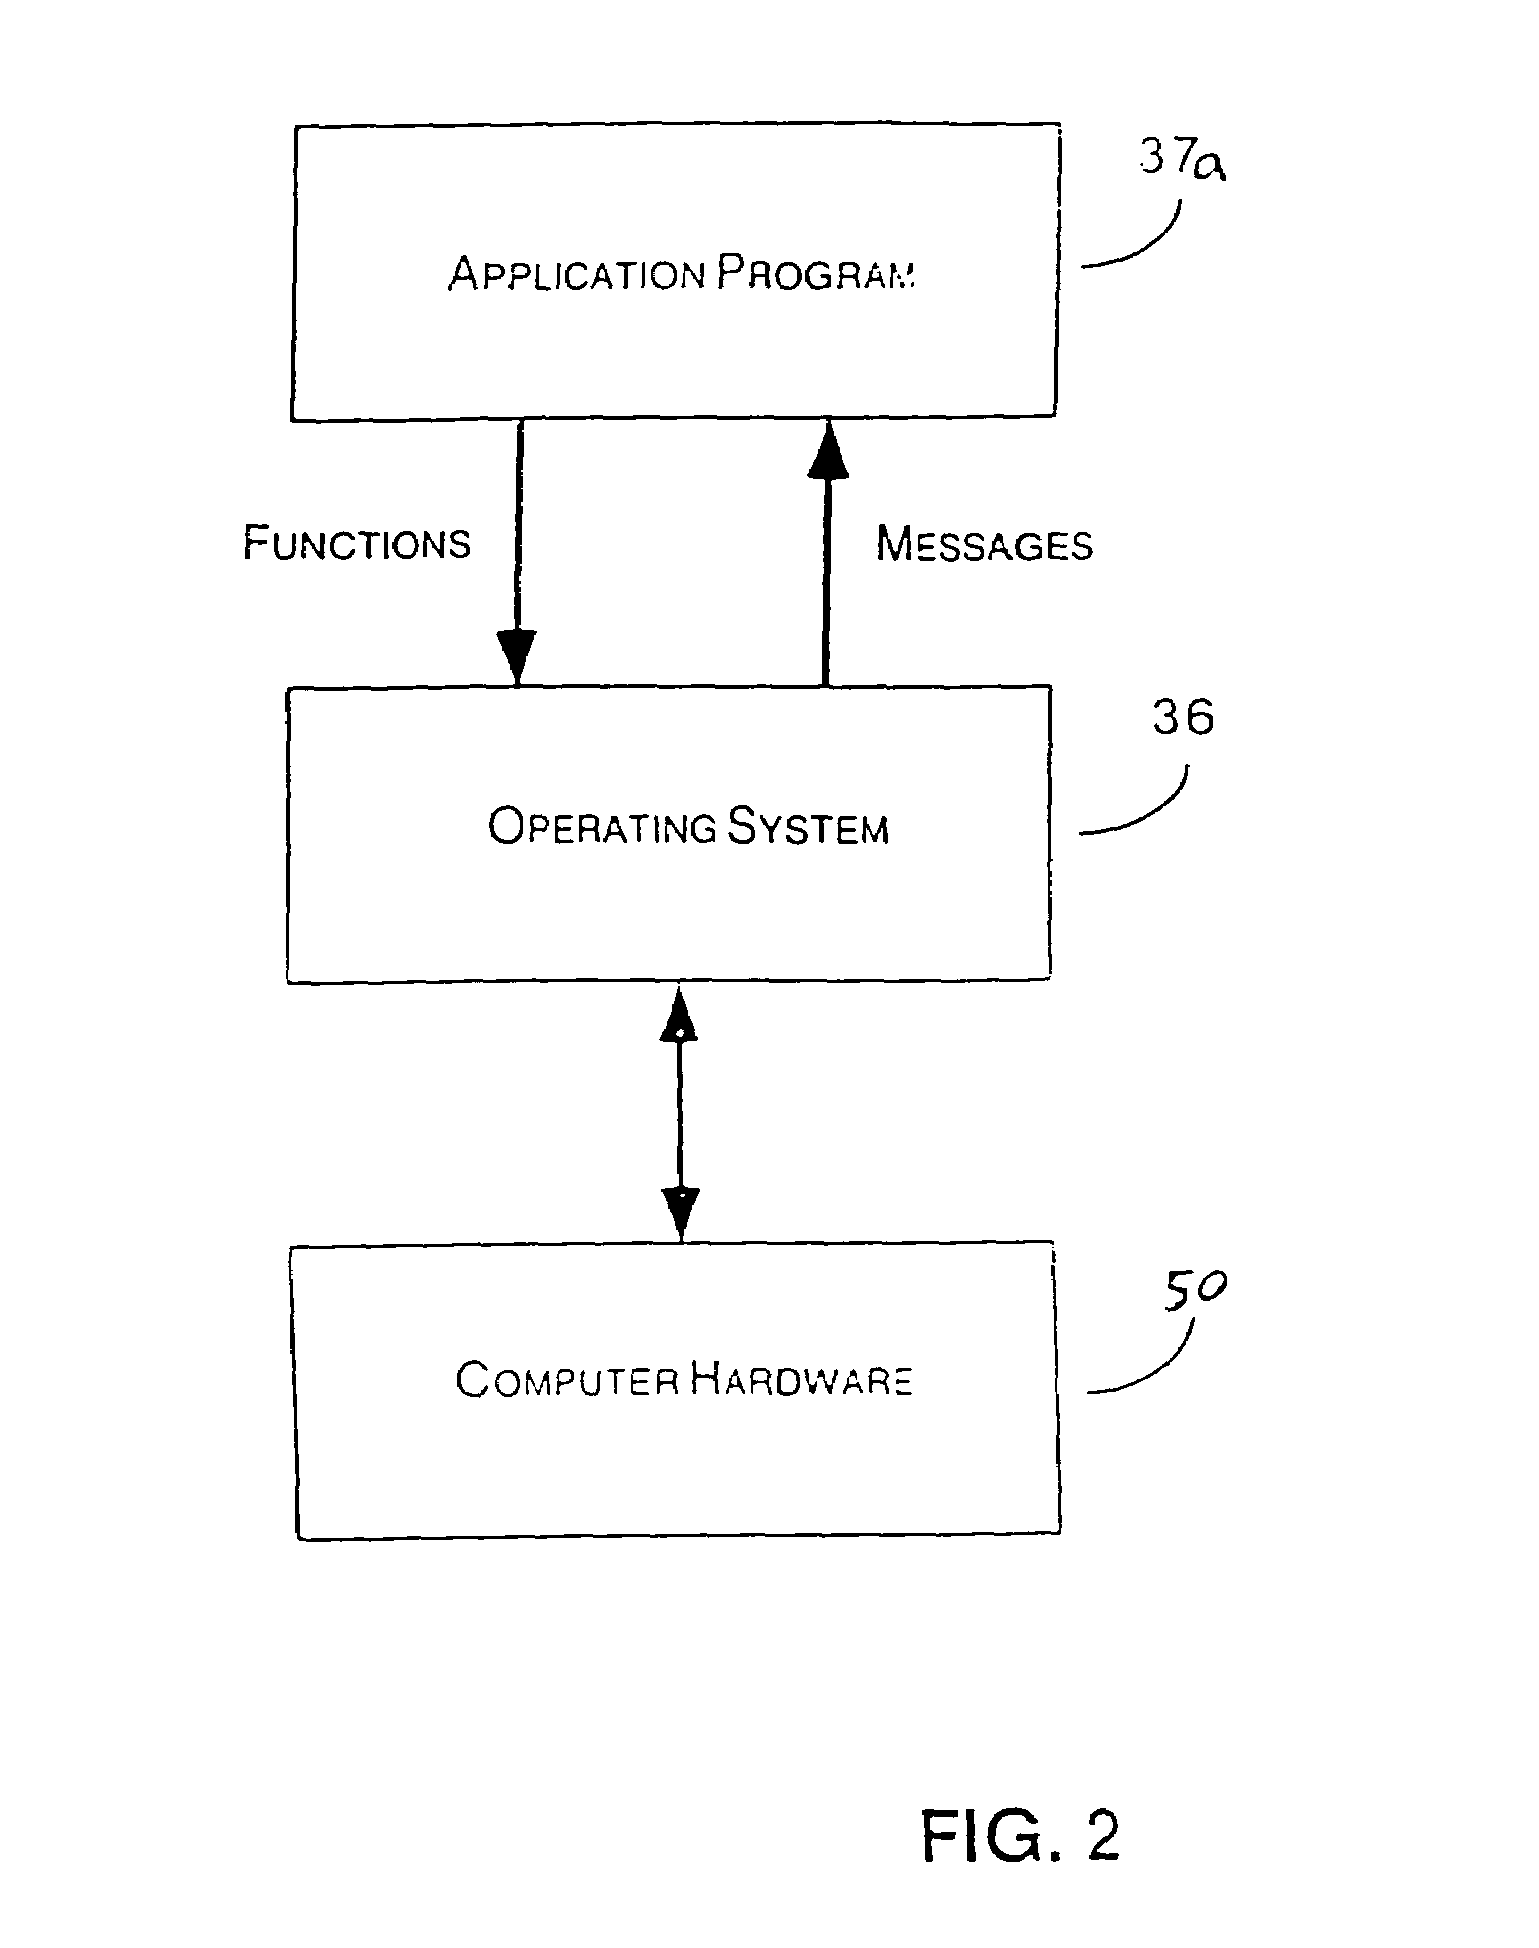 System and method for generating a schedule based on resource assignments